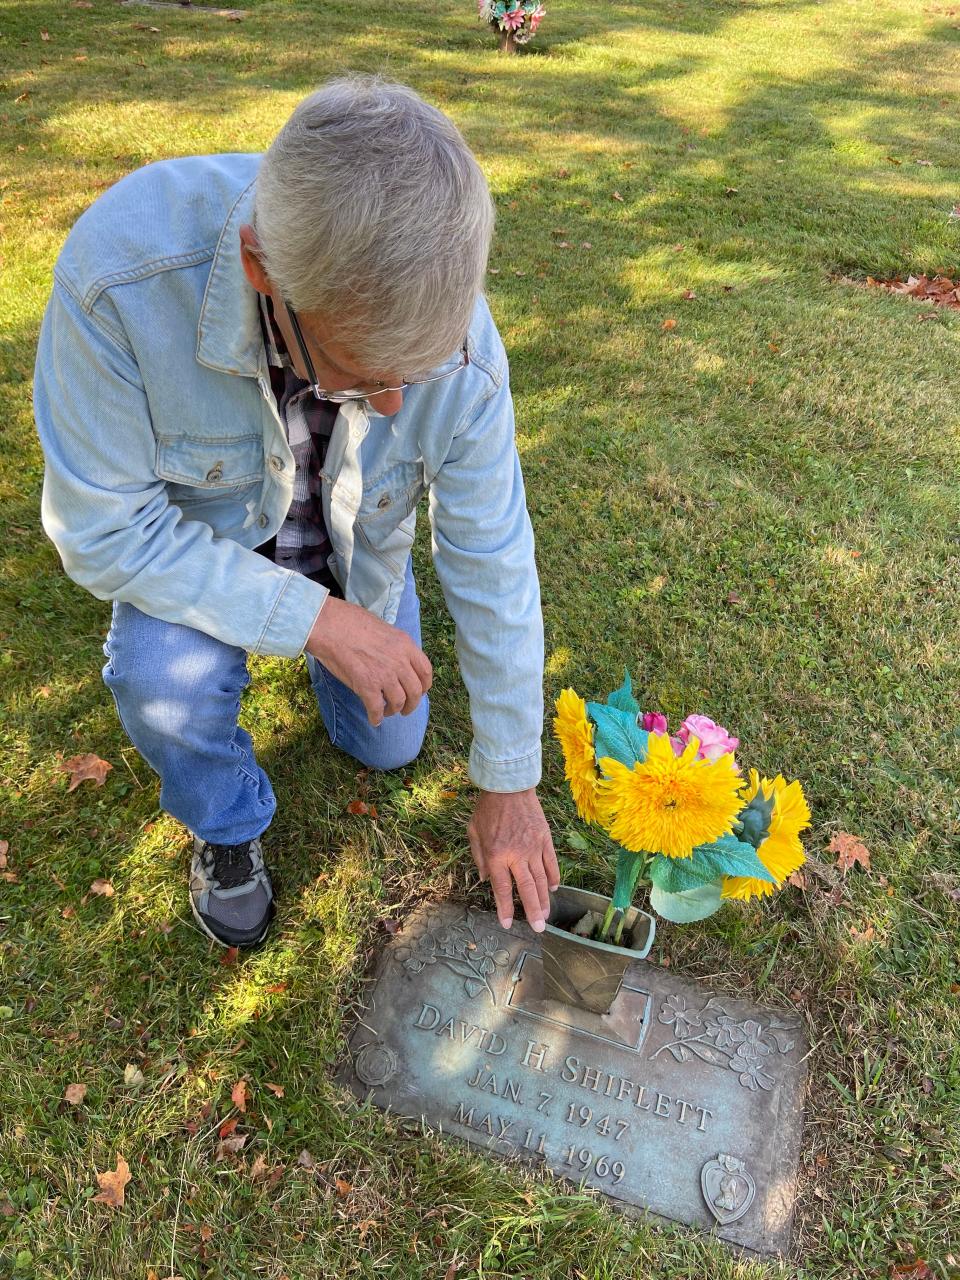 Dean visits his friend's grave at Mountain State Memorial Cemetery in Elkins, West Virginia.